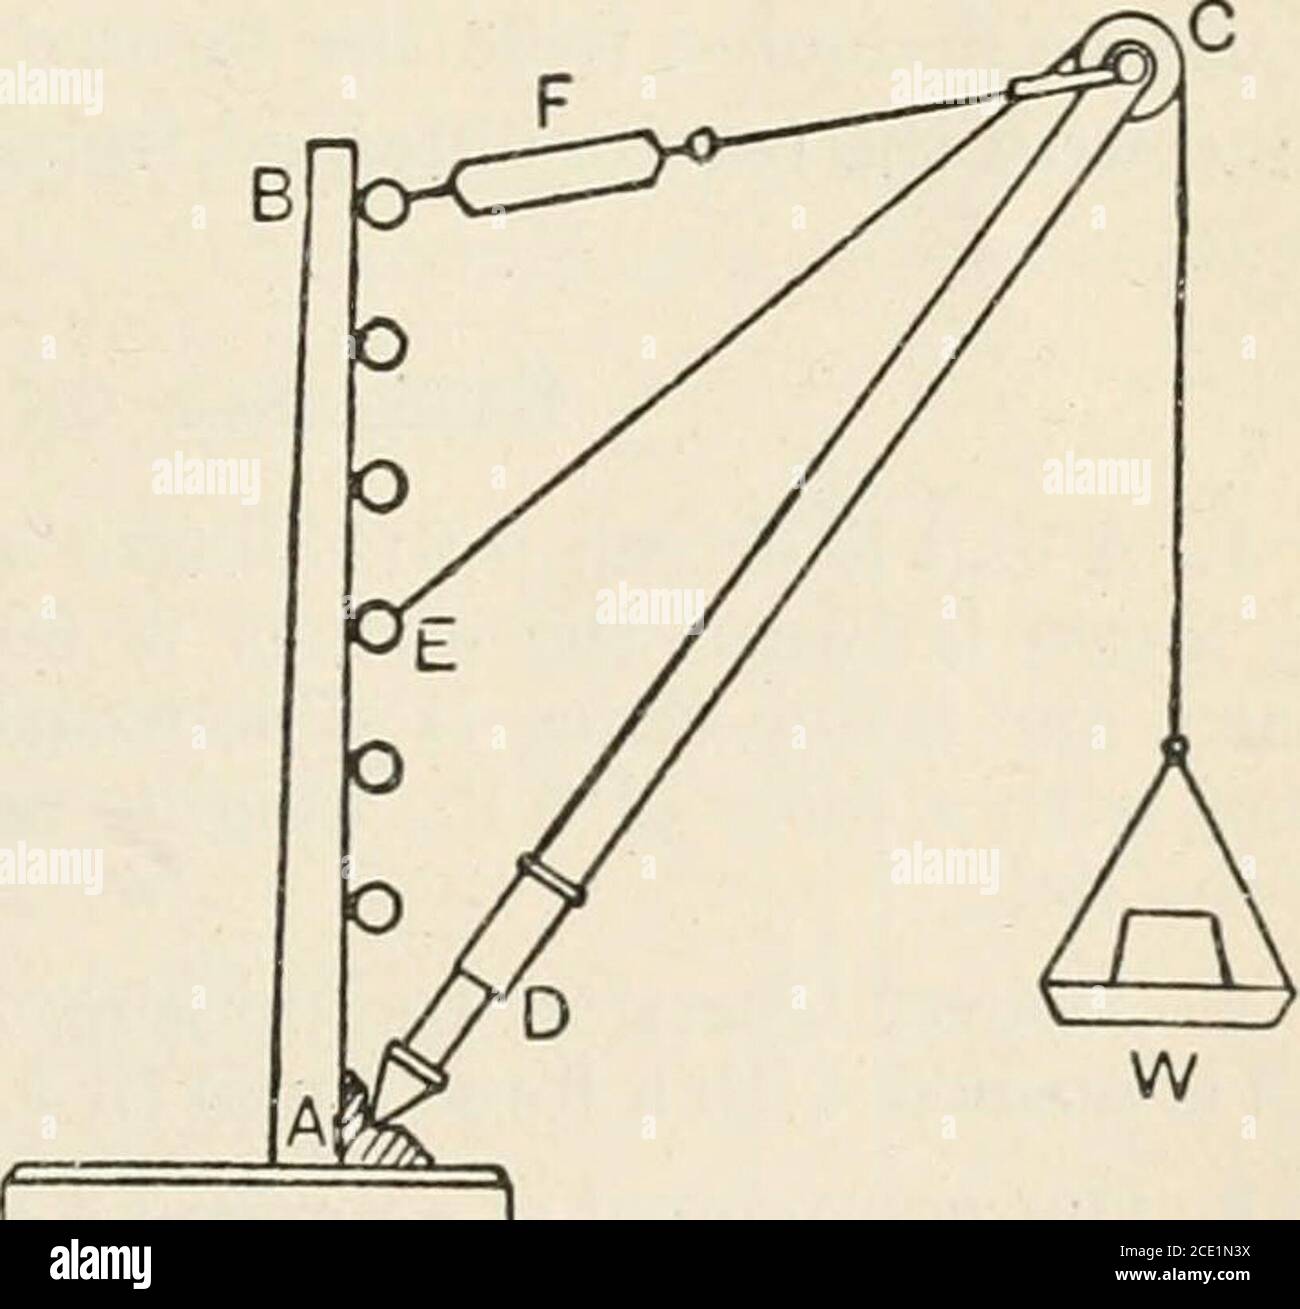 . A text book of physics, for the use of students of science and engineering . —Derrick crane. A derrick crane model is shown in Fig. 98,consisting of a post AB firmly fixed to a base board which is screwed to atable ; a jib AC has a pointed end at A bearing in a cup recess, a pulley at Cand a compression spring balance atD. A tie BC supports the jib andis of adjustable length ; a springbalance for measuring the pull isinserted at F. The weight is sup-ported by a cord led over thepulley at C and attached to one ofthe screw-eyes on the post. Theinclination of the jib may be alteredby adjusting Stock Photo